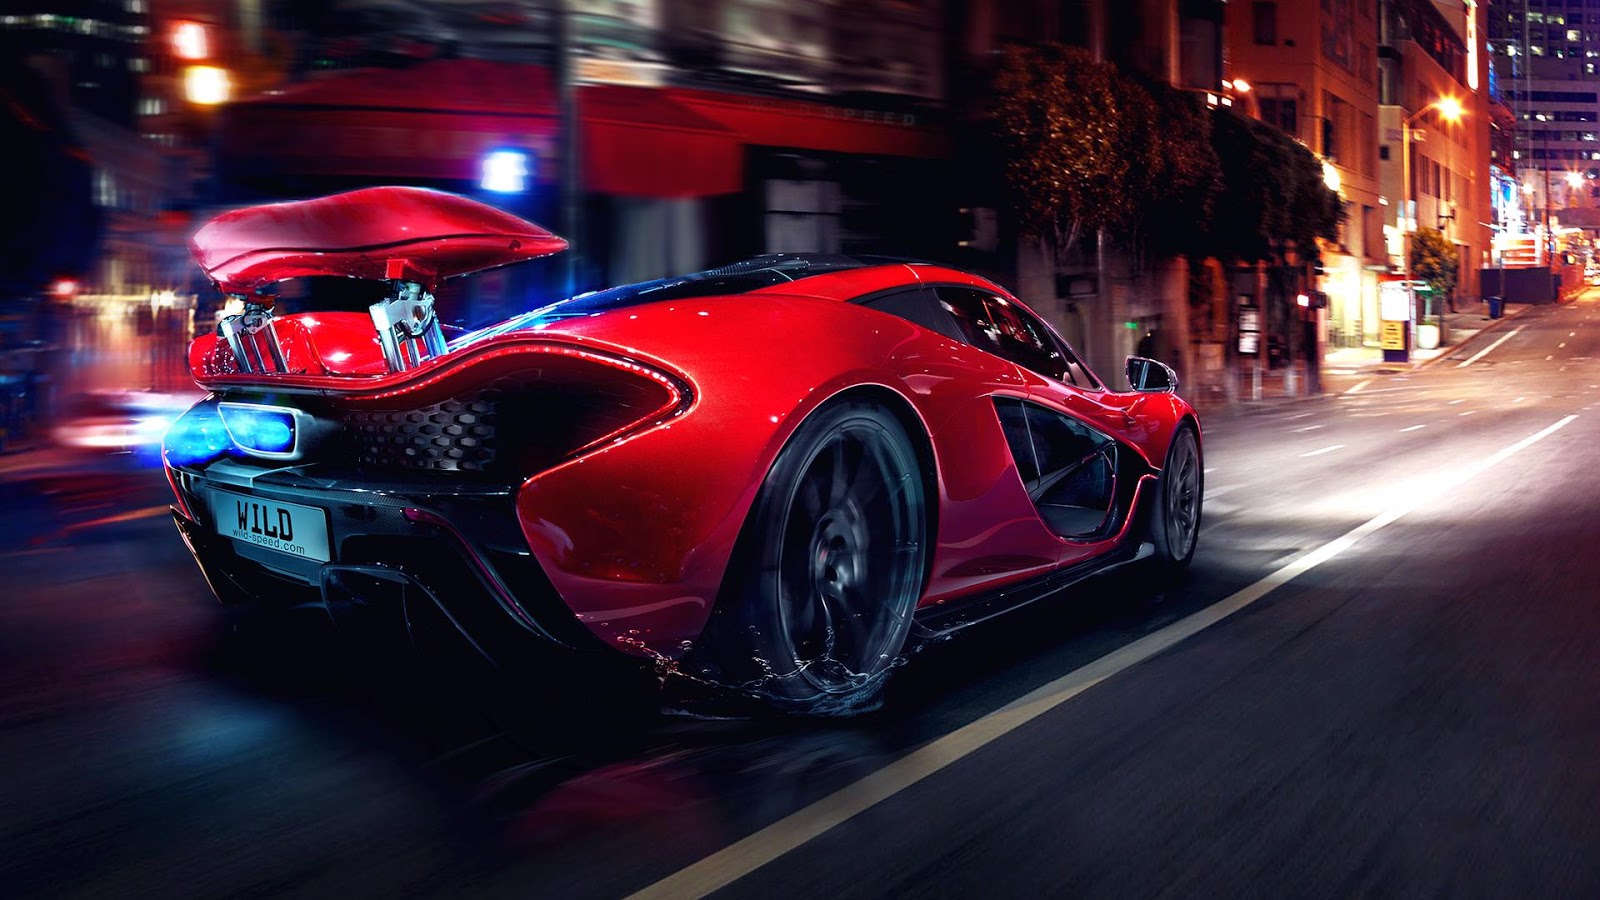 4K Cars Wallpapers High Quality | Download Free